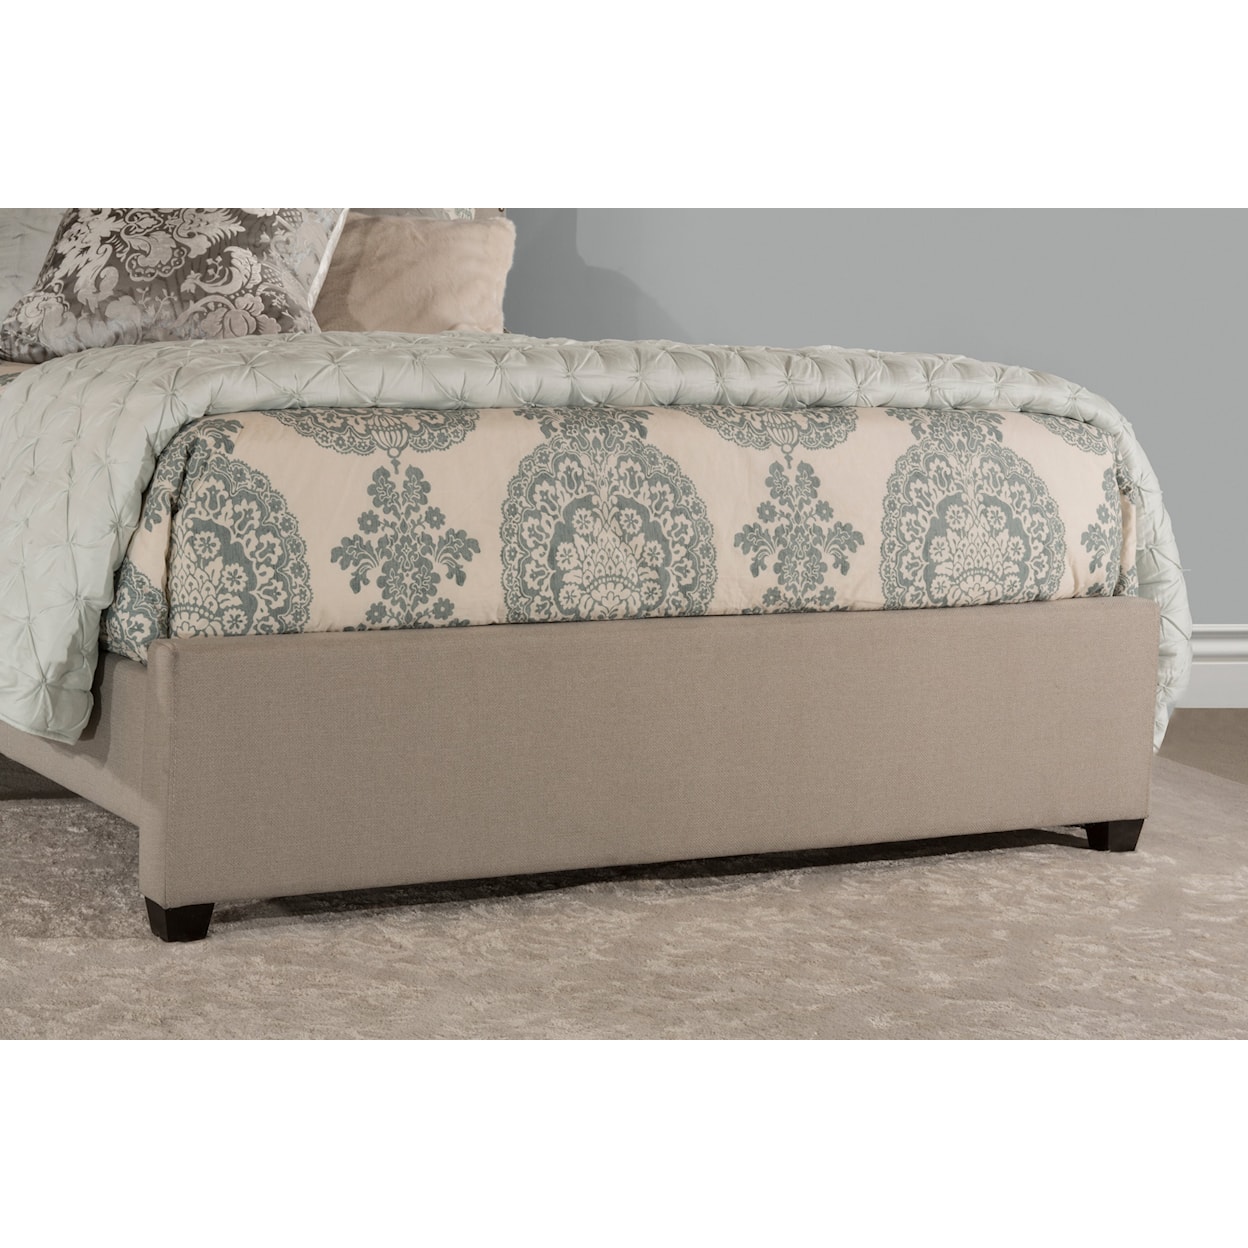 Hillsdale Lila Cal King Bed